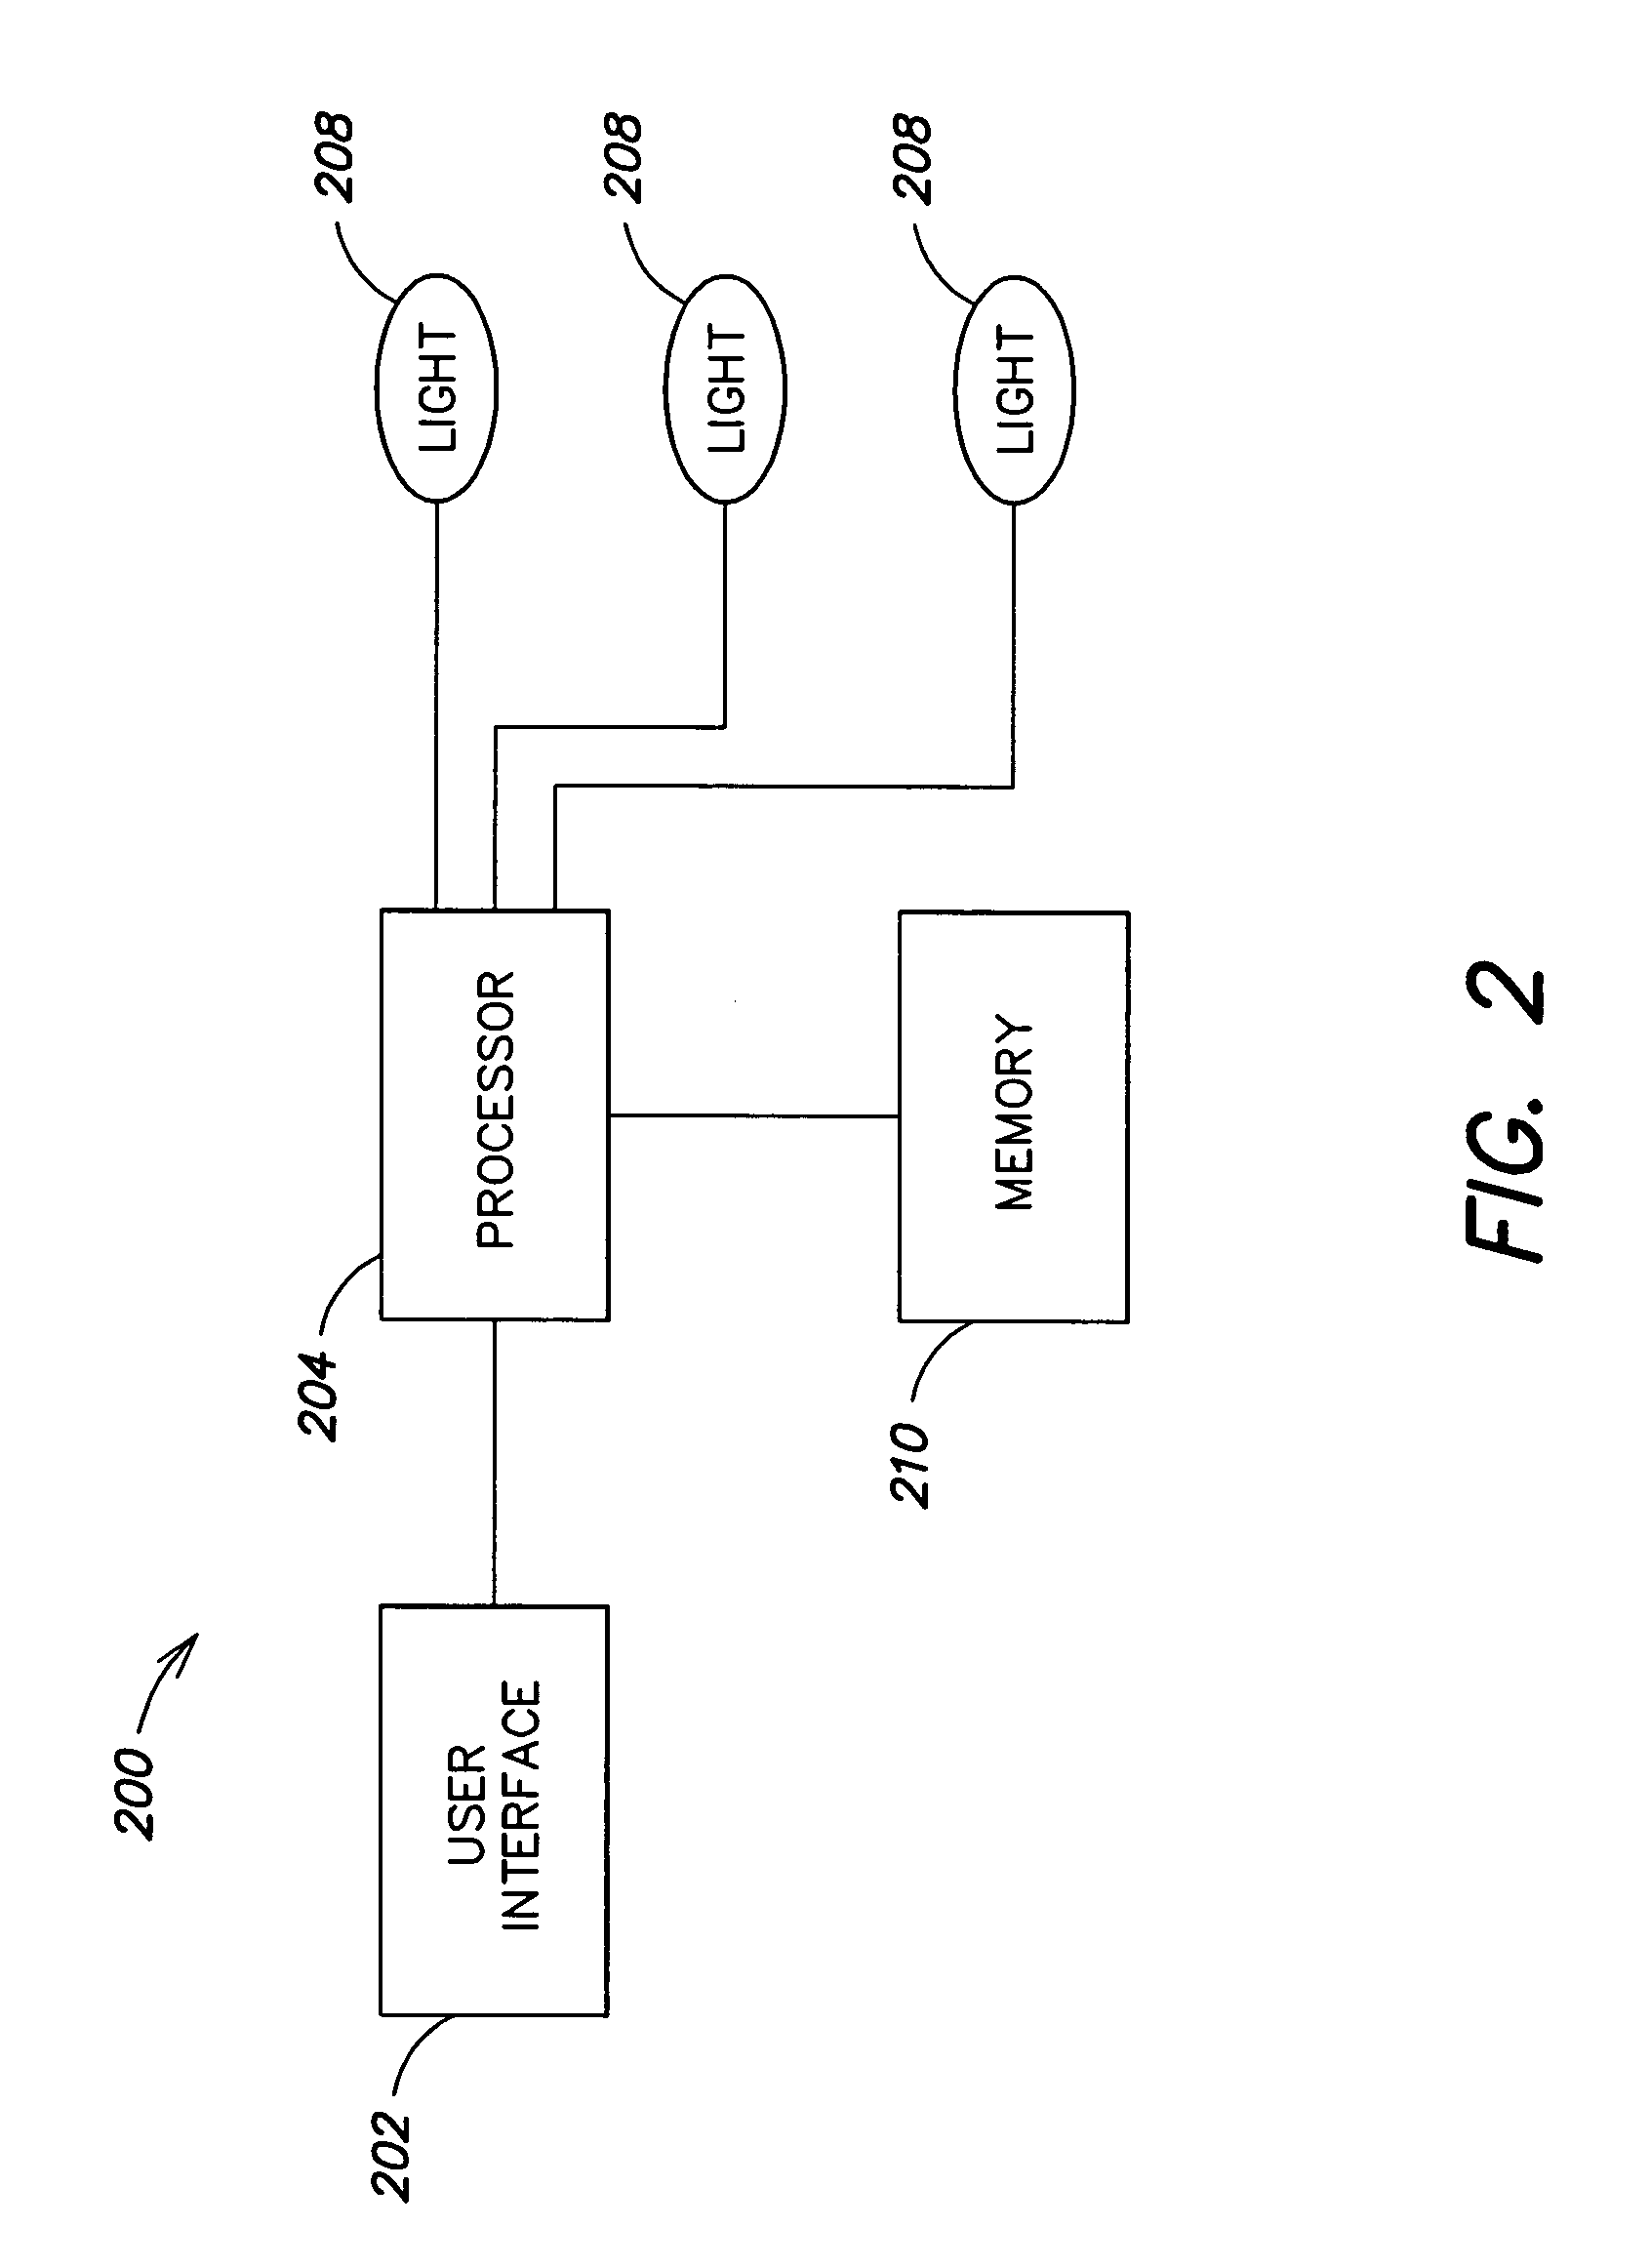 Systems and methods of generating control signals